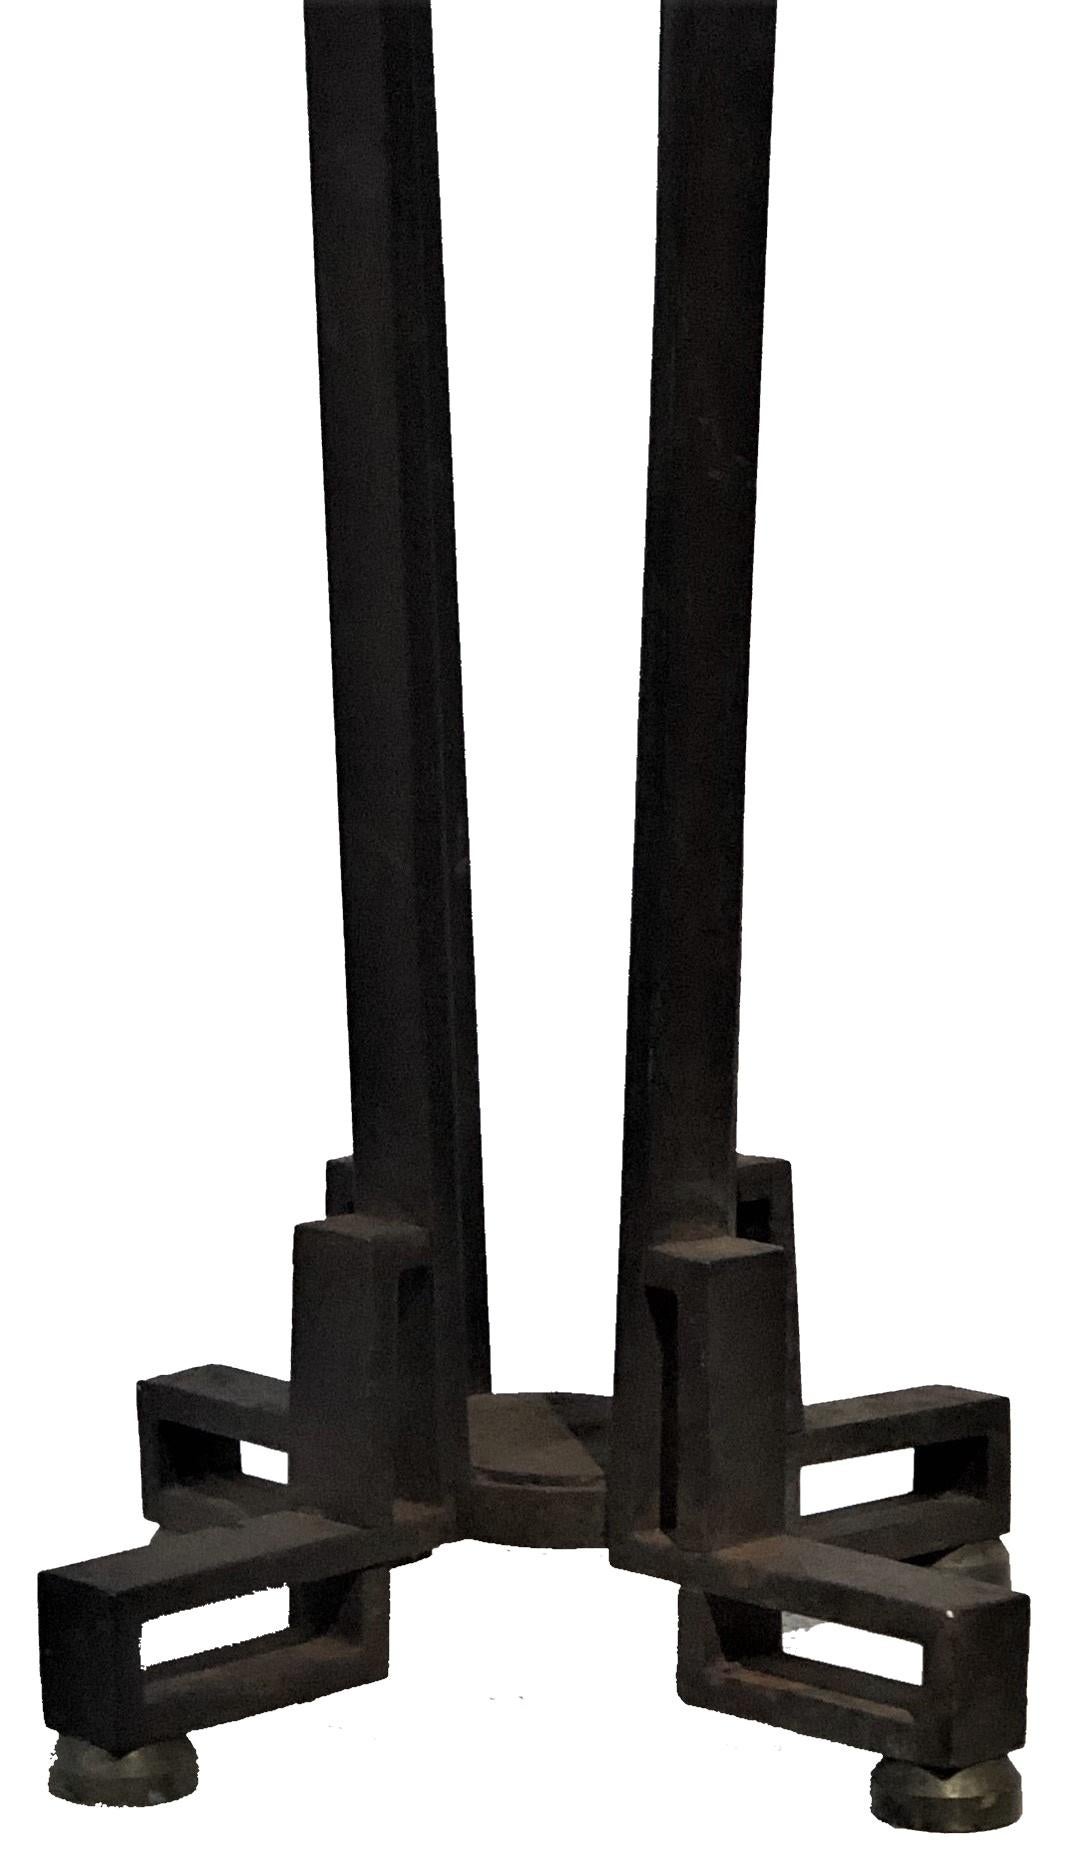 French Art Deco Wrought Iron Pedestal w/ Marble Top, ca. 1920s For Sale 2